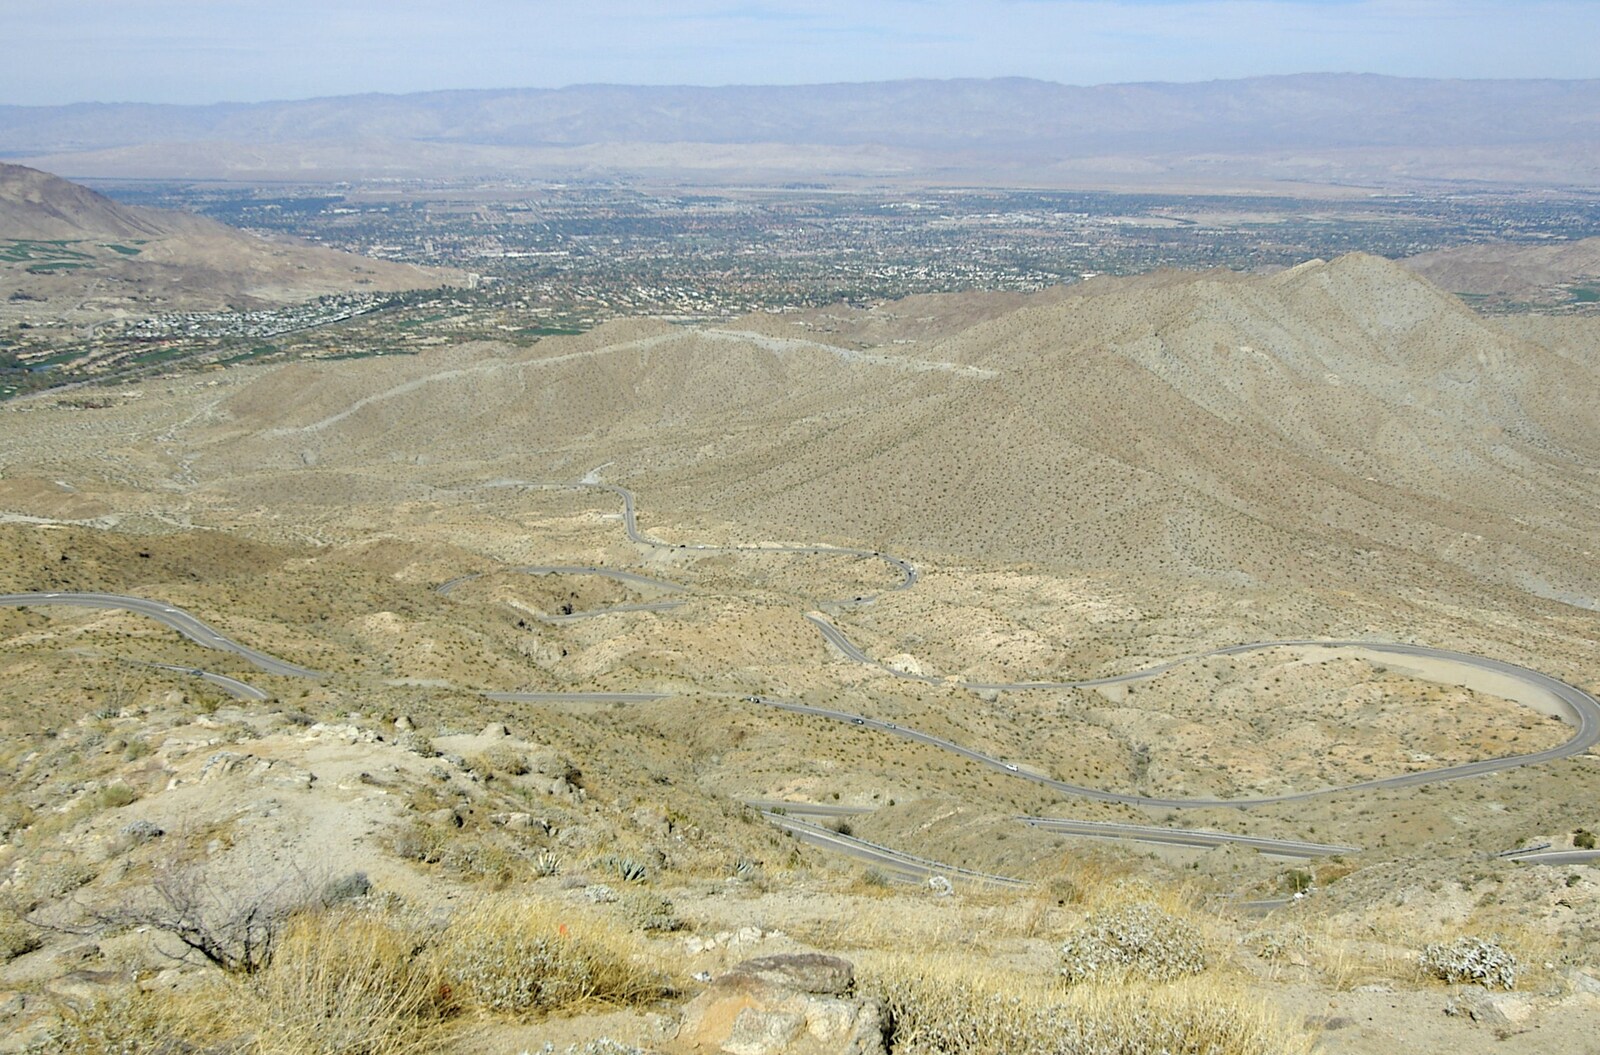 A vista from a popular viewpoint from Mojave Desert: San Diego to Joshua Tree and Twentynine Palms, California, US - 5th March 2006